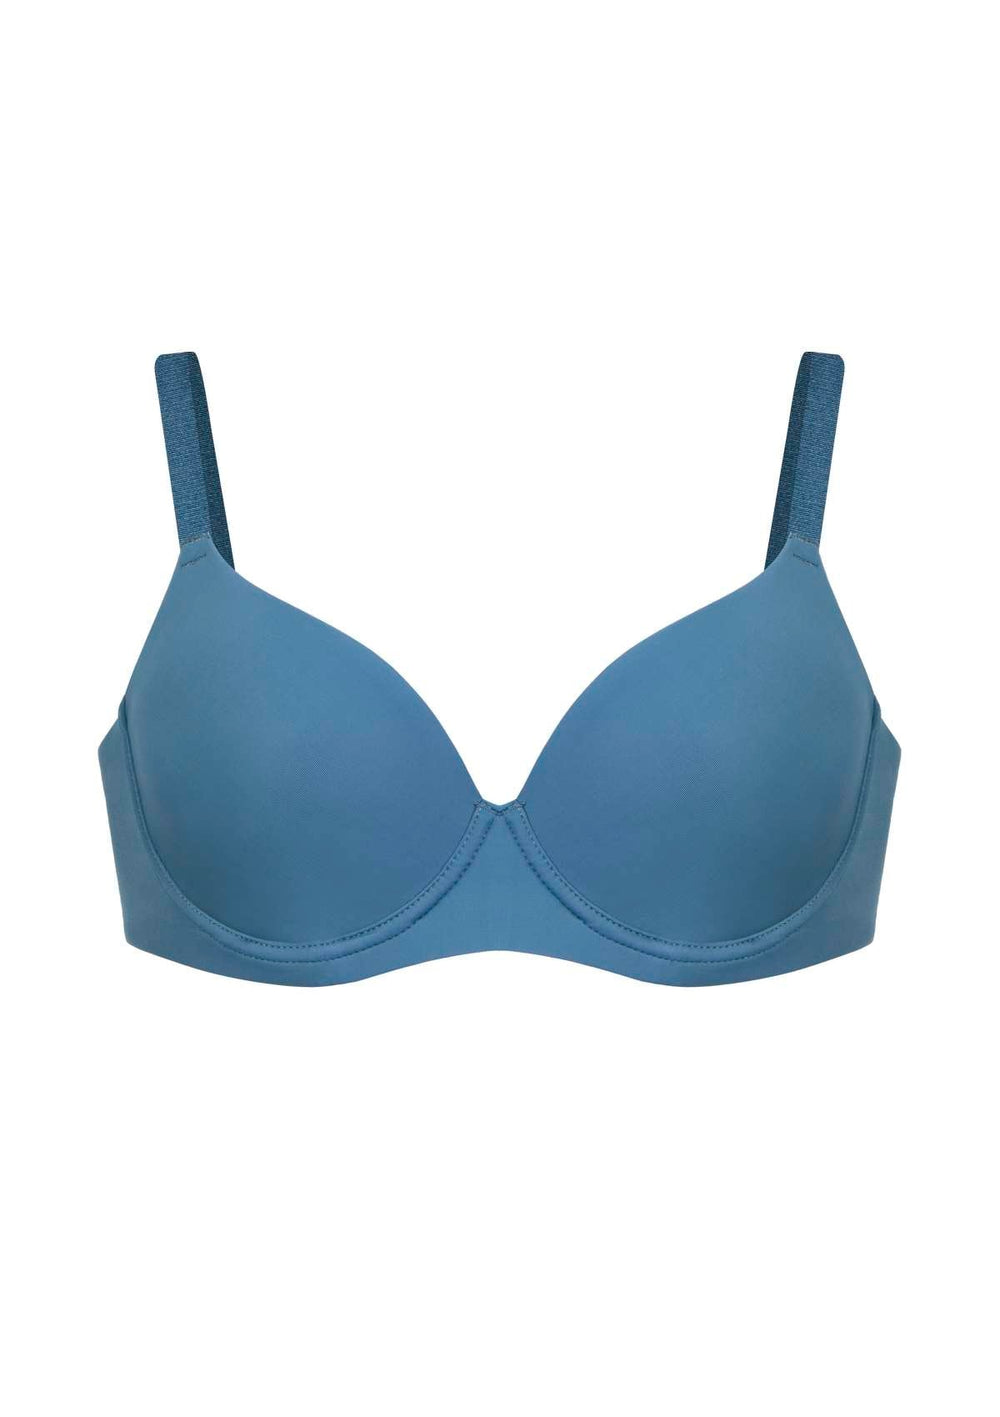 Bras N Things T Shirt Bra Size 10G 32G Moulded Underwire Teal Blue